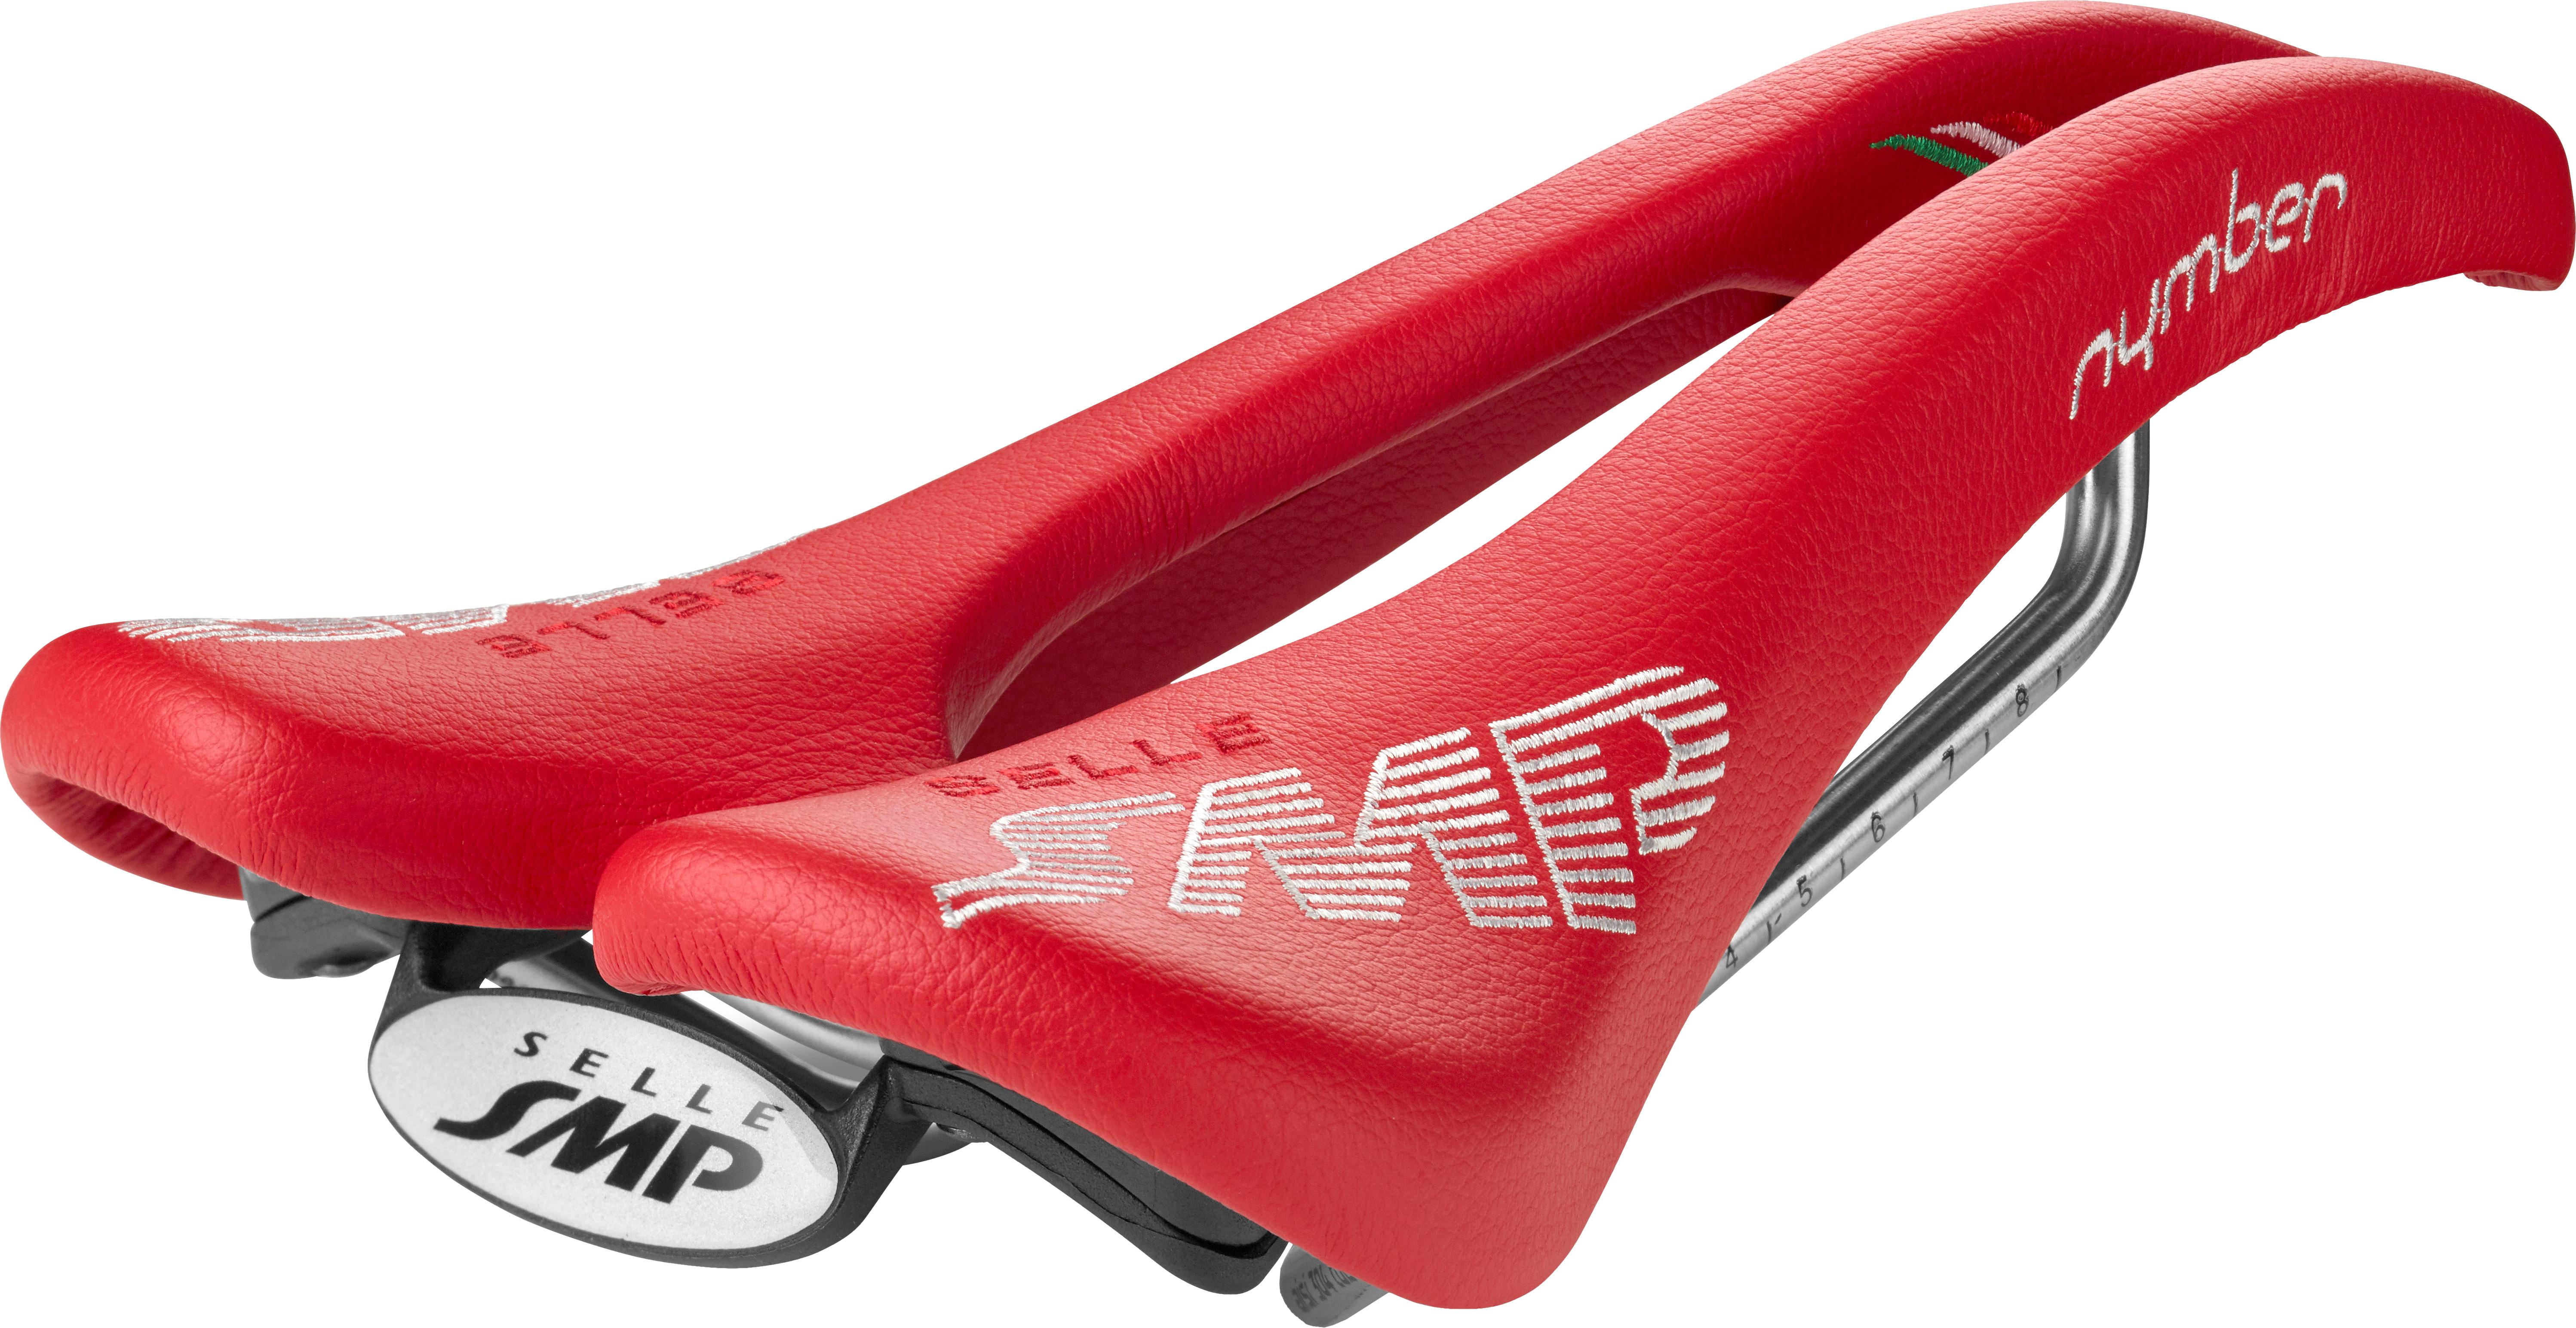 Selle Smp Nymber Saddle - Red